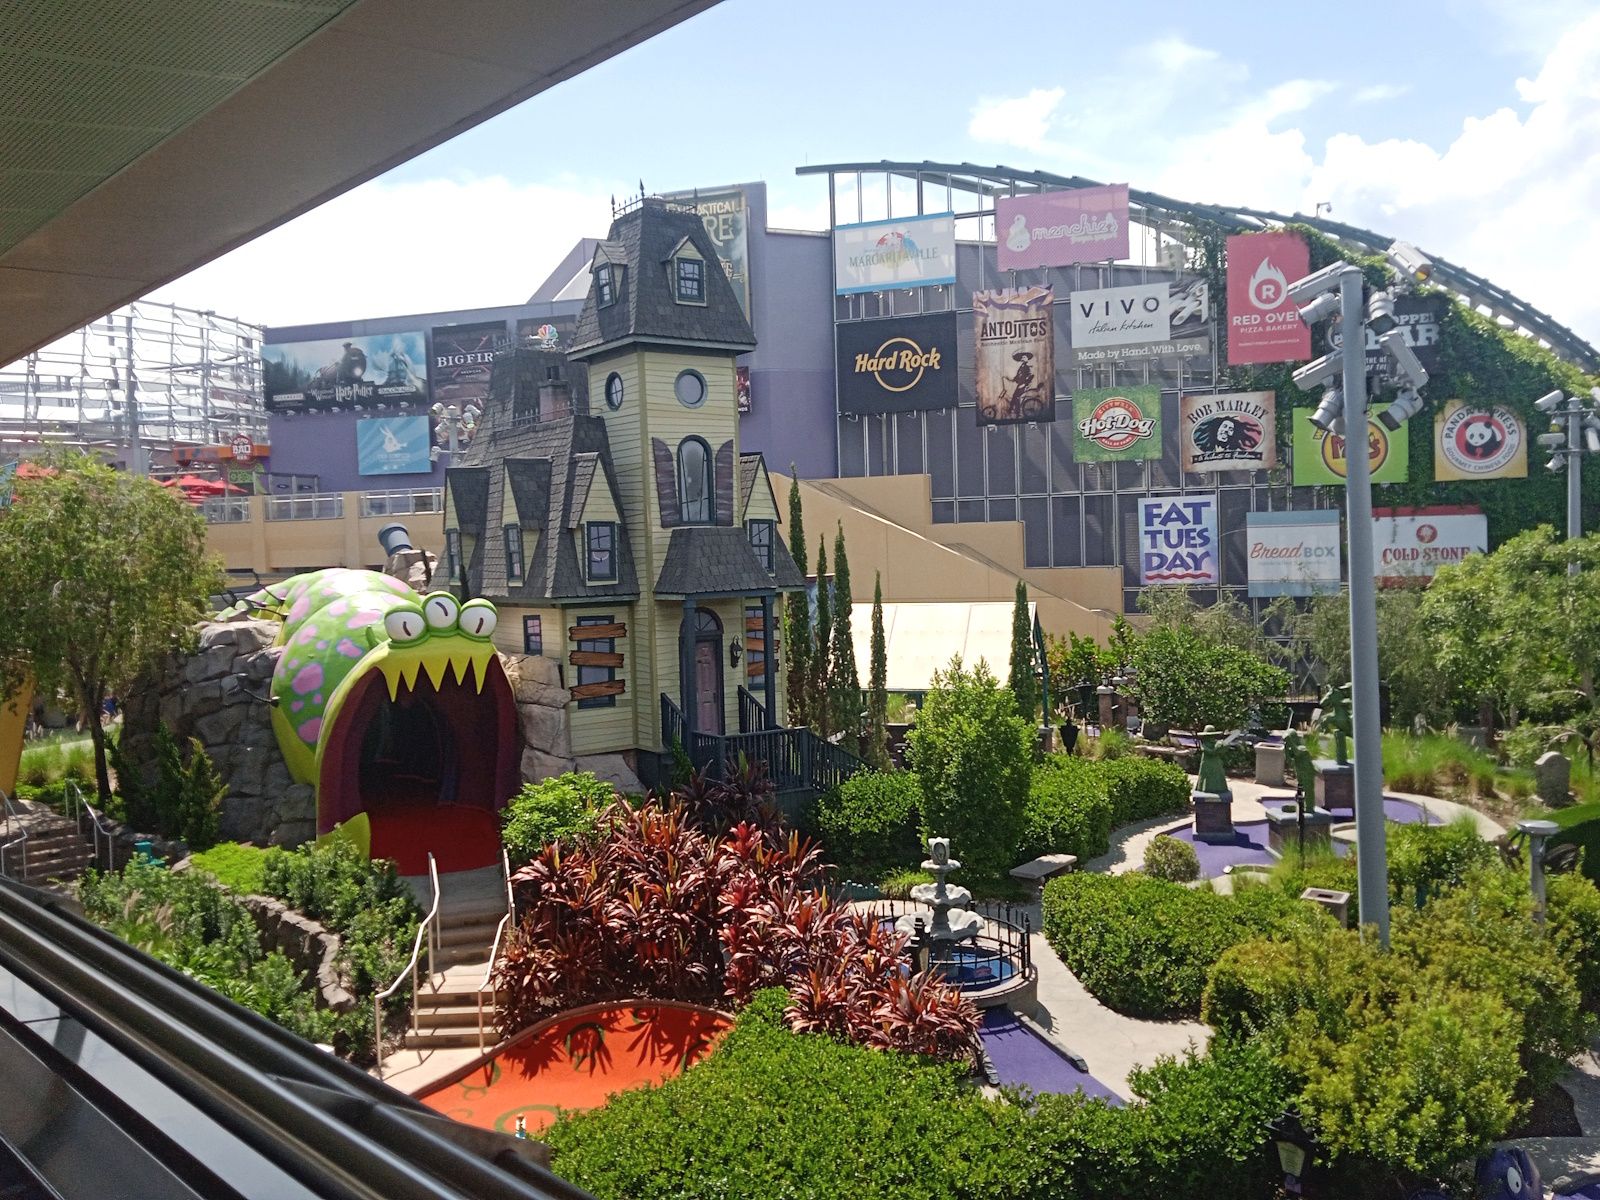 Local Guides Connect - Universal Studios Florida - Enter the Dragon - Local  Guides Connect